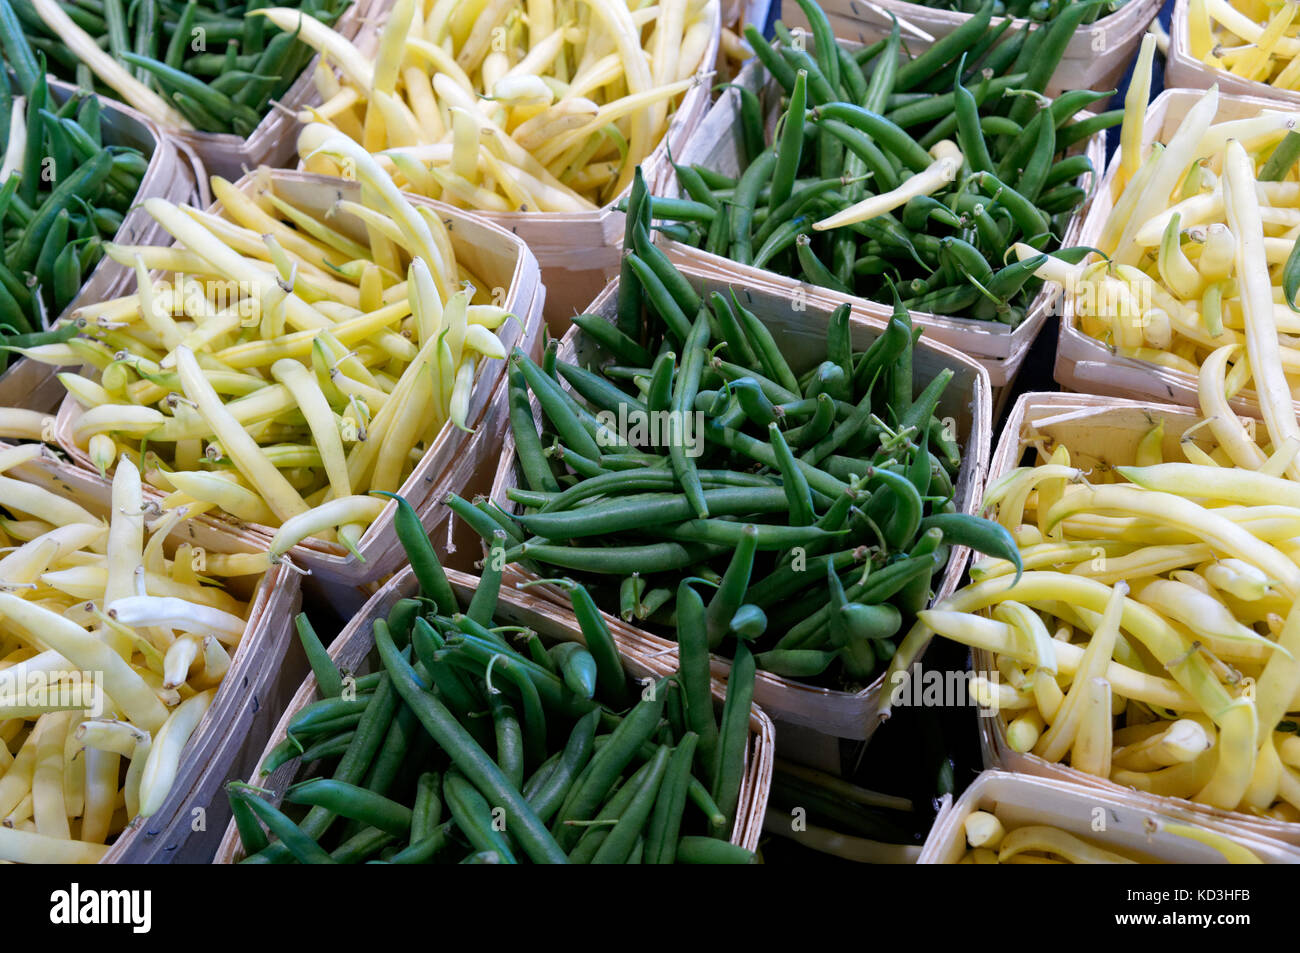 Containers of wax beans and green beans for sale in the Jean Talon public market or Marche Jean Talon, Montreal, Quebec, Canada Stock Photo